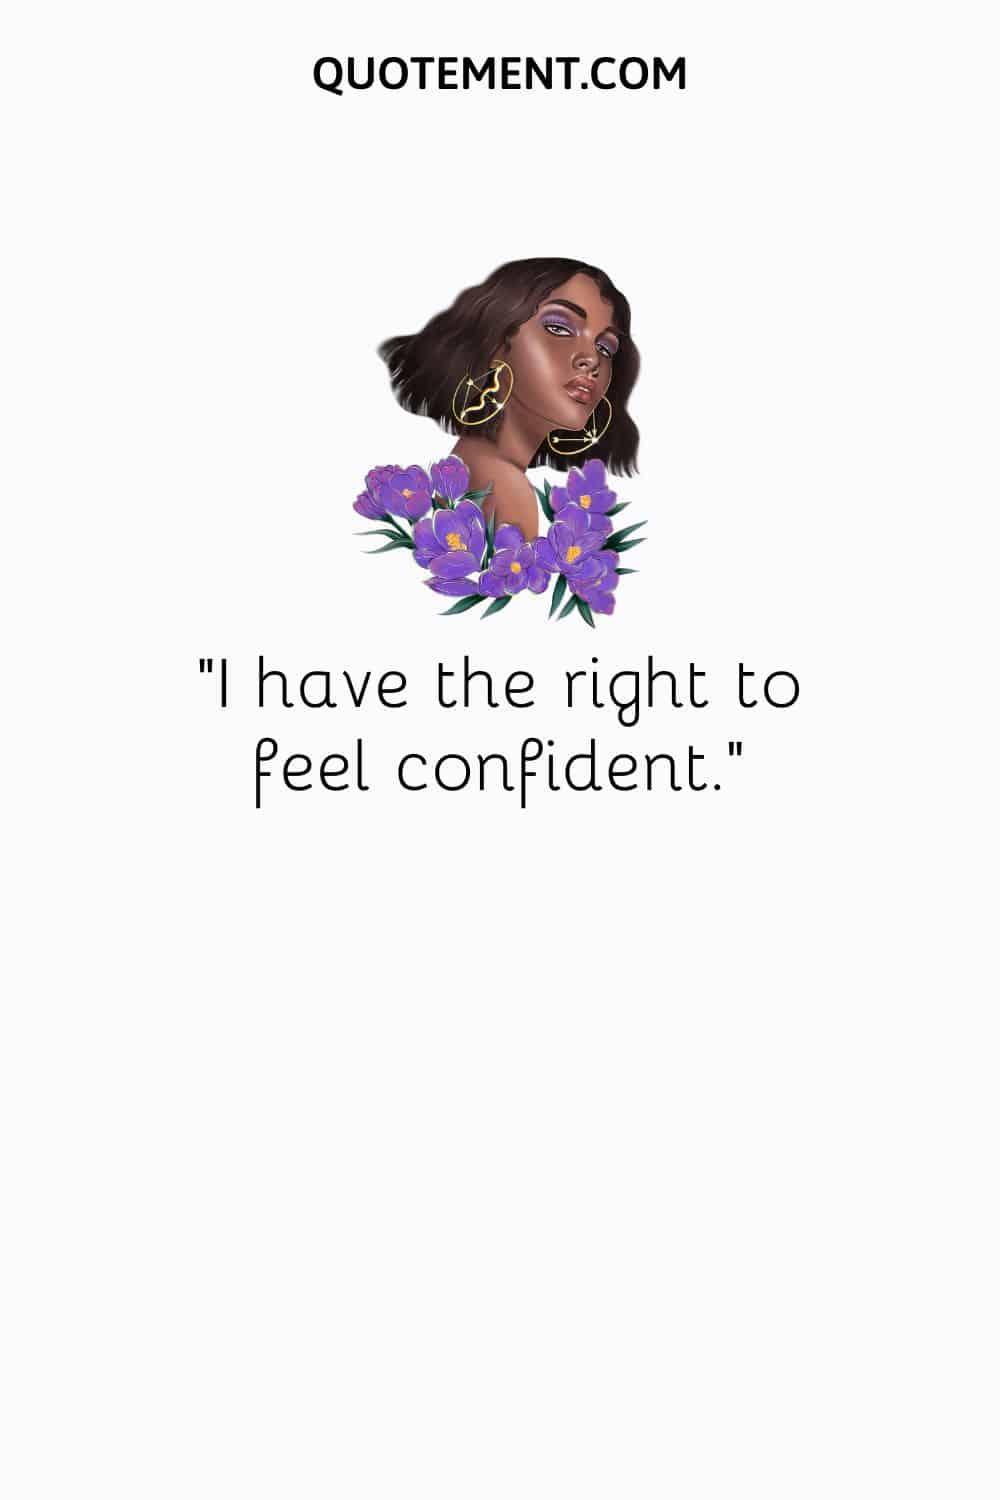 image of flowers and a black lady representing positive self-confidence affirmation